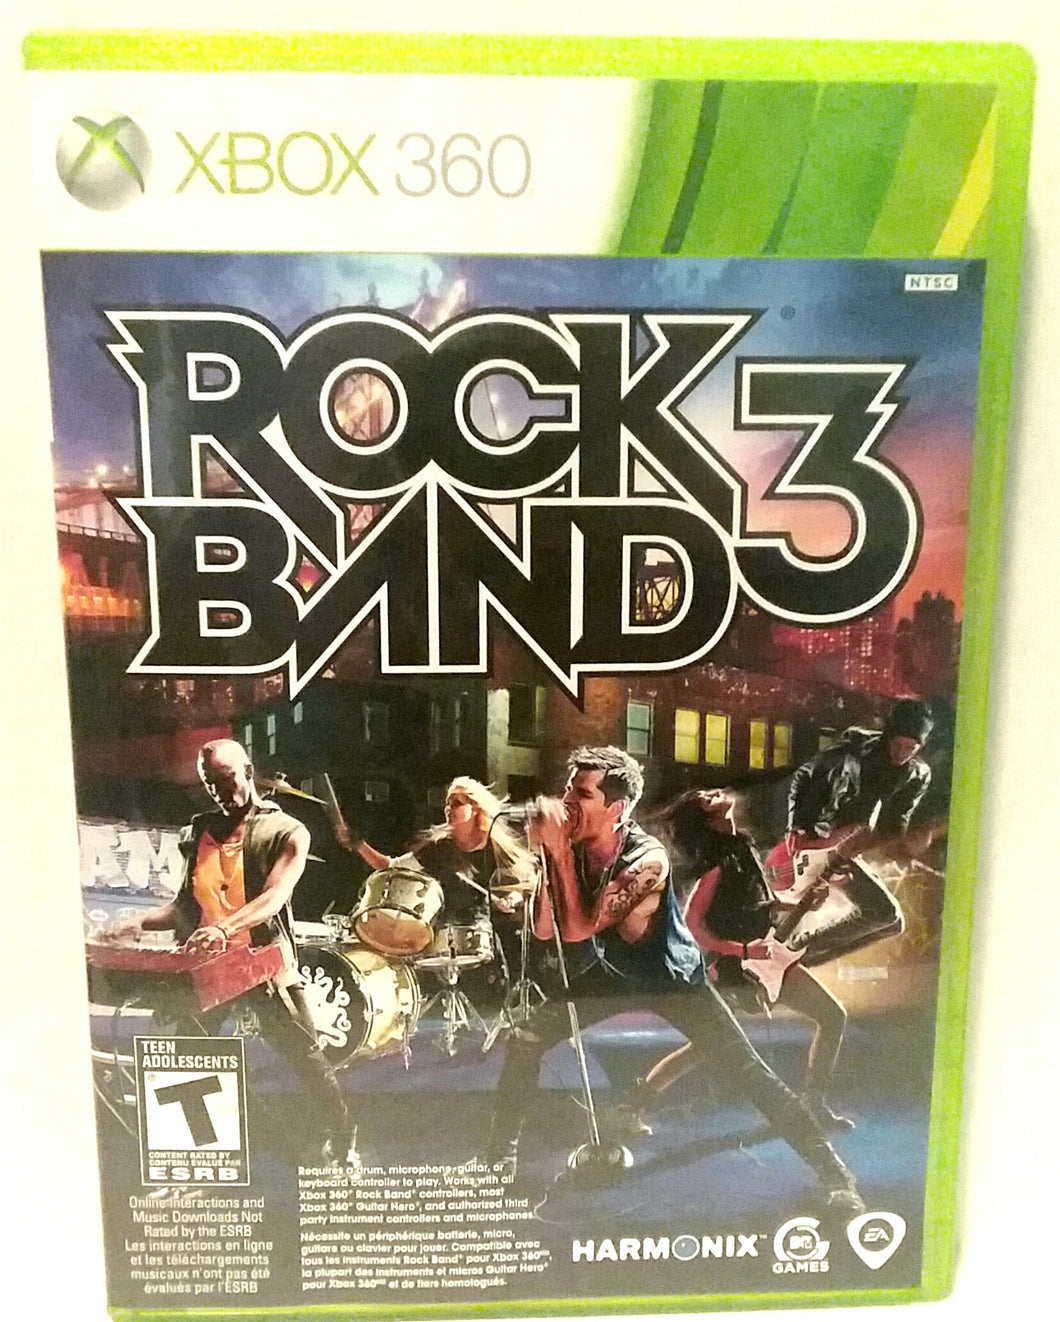 XBOX 360 Rock Band 3 Empty Storage Case No Game Included